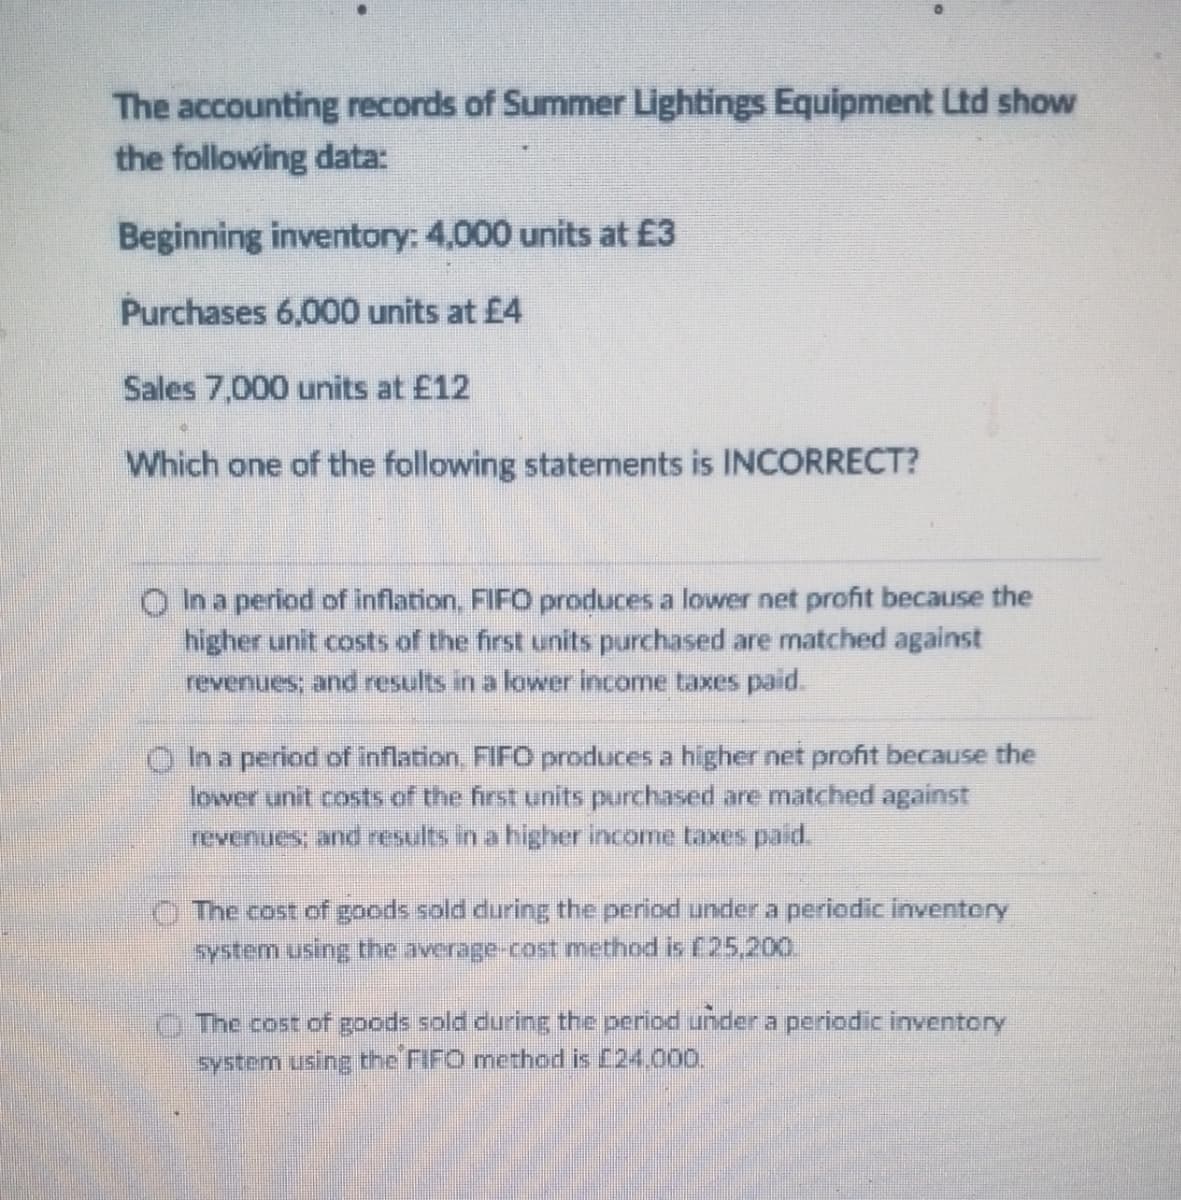 The accounting records of Summer Lightings Equipment Ltd show
the following data:
Beginning inventory: 4,000 units at £3
Purchases 6,000 units at £4
Sales 7,000 units at £12
Which one of the following statements is INCORRECT?
O In a period of inflation. FIFO produces a lower net profit because the
higher unit costs of the first units purchased are matched against
revenues; and results in a lower income taxes paid.
In a period of inflation, FIFO produces a higher net profit because the
lower unit costs of the first units purchased are matched against
revenues, and results in a higher income taxes paid,
O The cost of goods sold during the period under a periodic inventery
system using the average-cost method is C25,200.
The cost of goods sold during the period under a periodic inventory
system using the FIFO method is [24,000.
